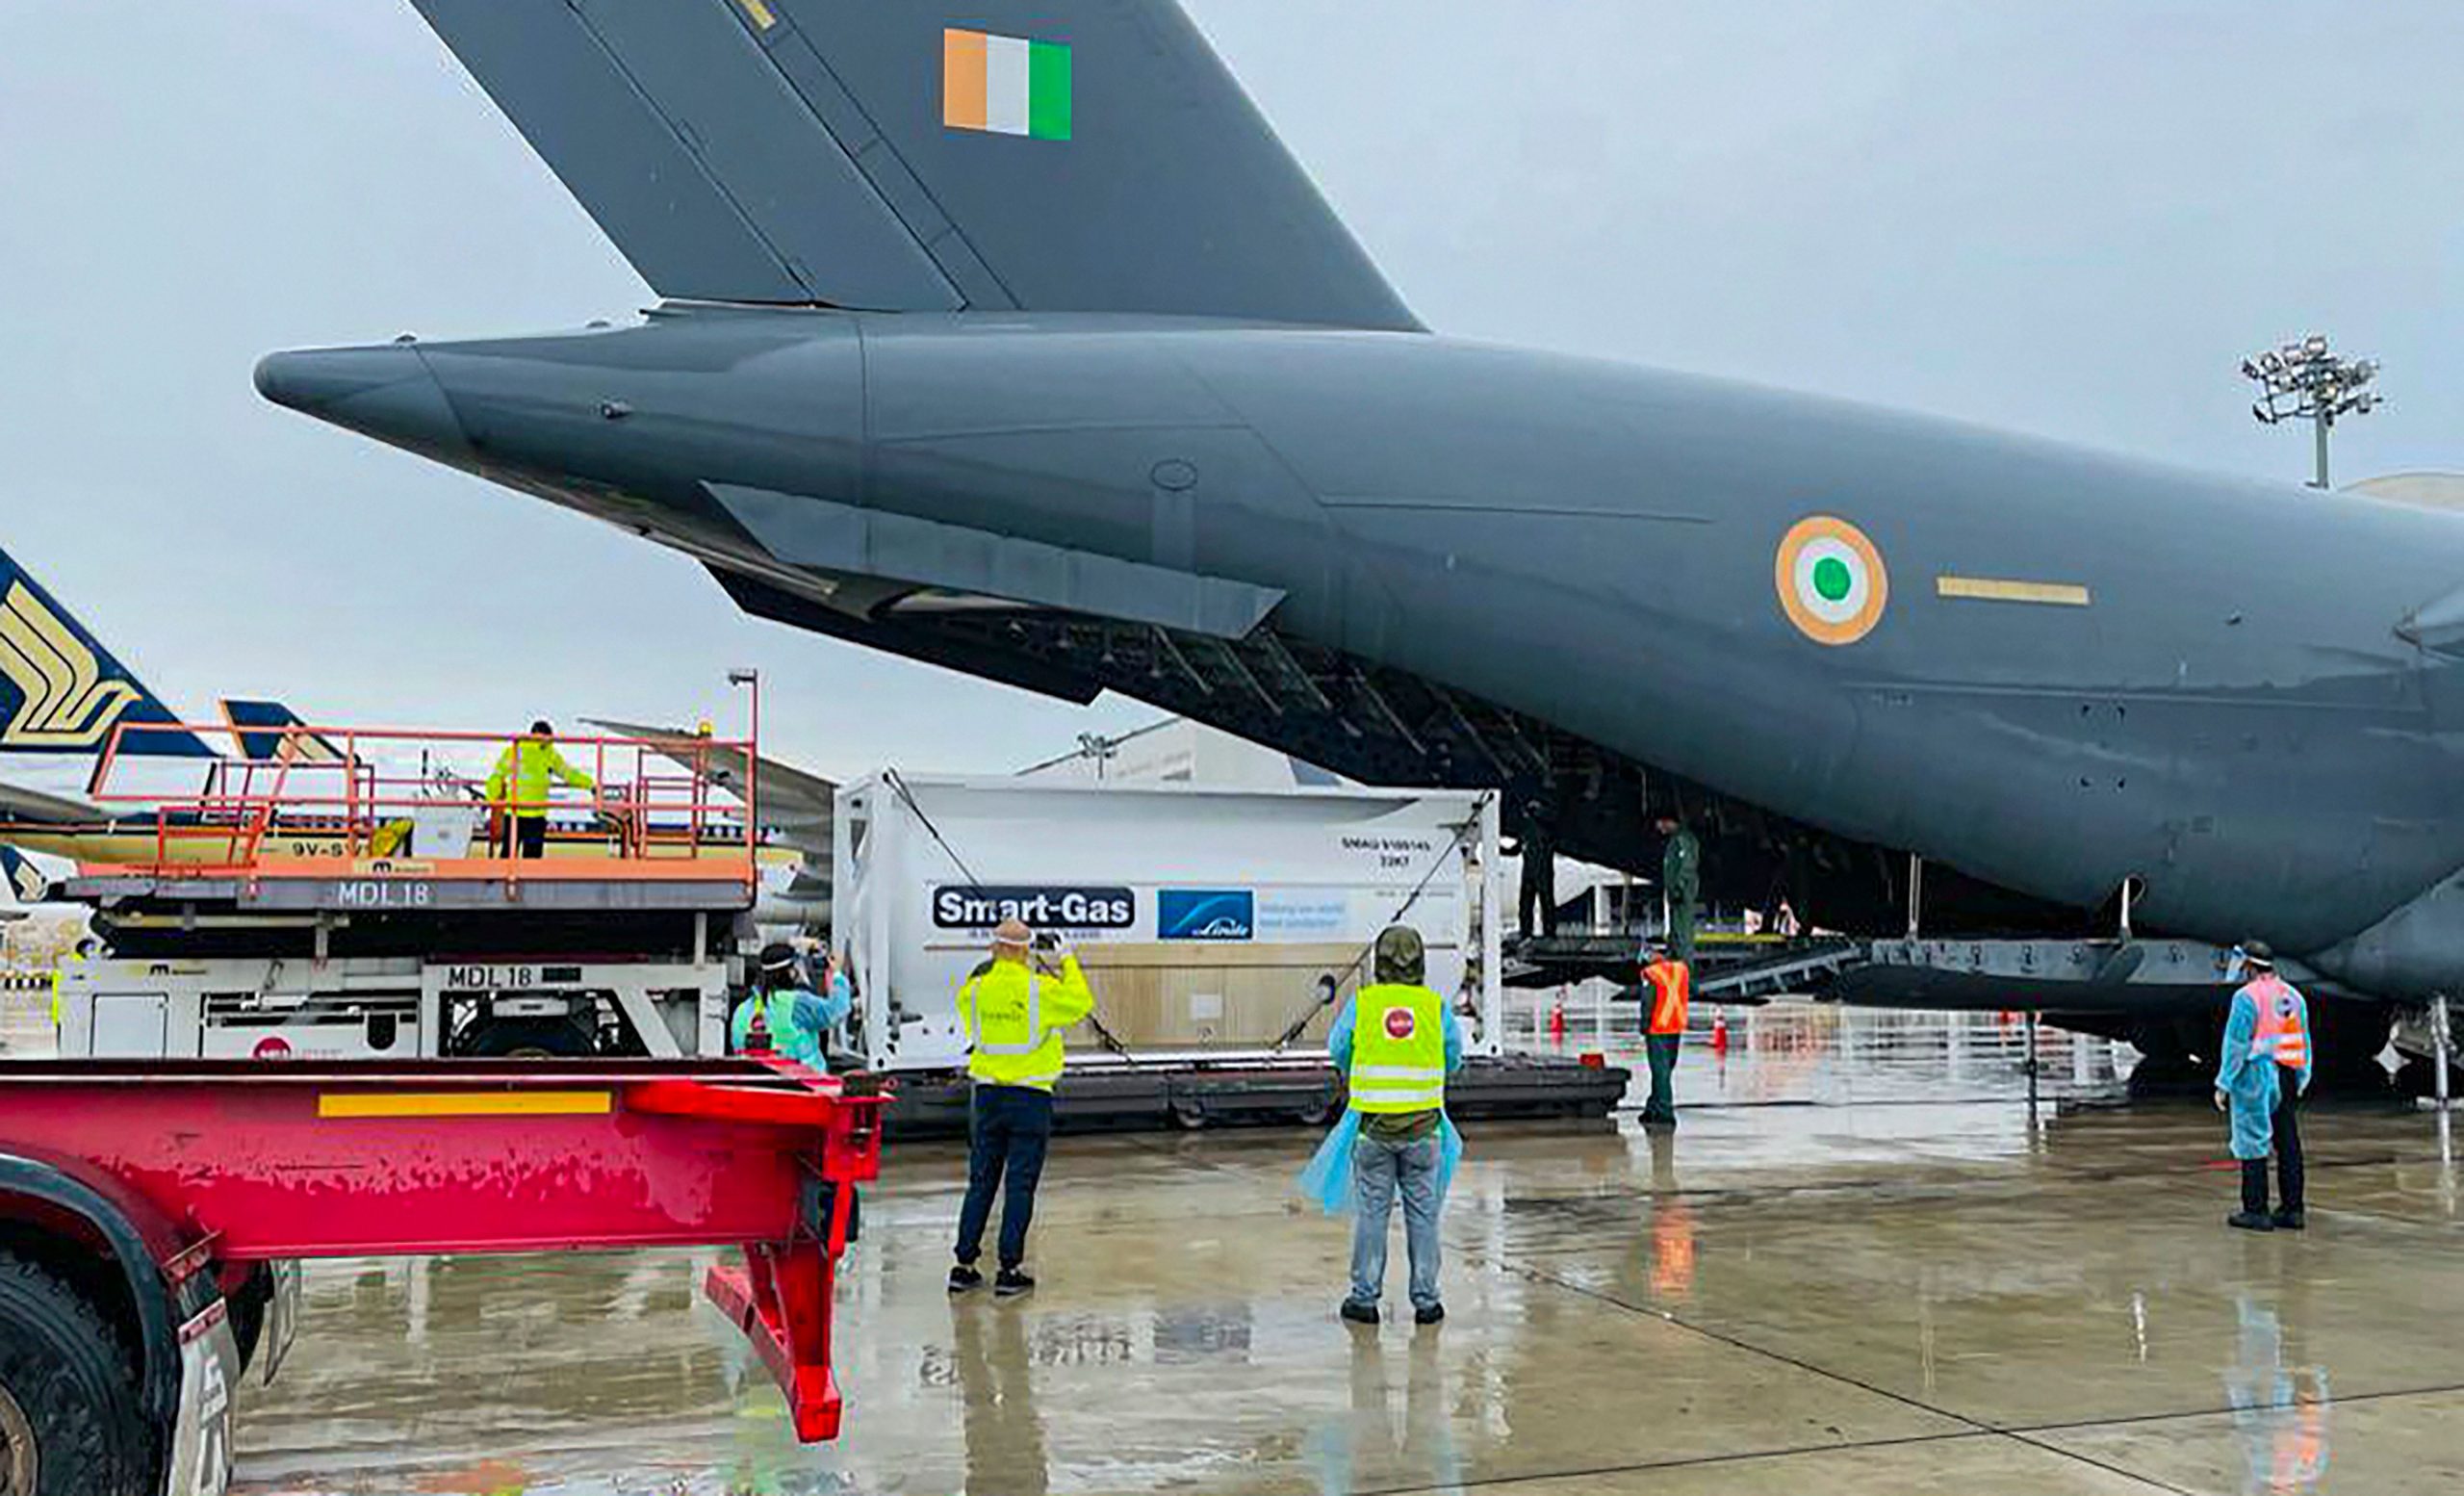 Indian Air Force brings 4 cryogenic oxygen containers from Singapore